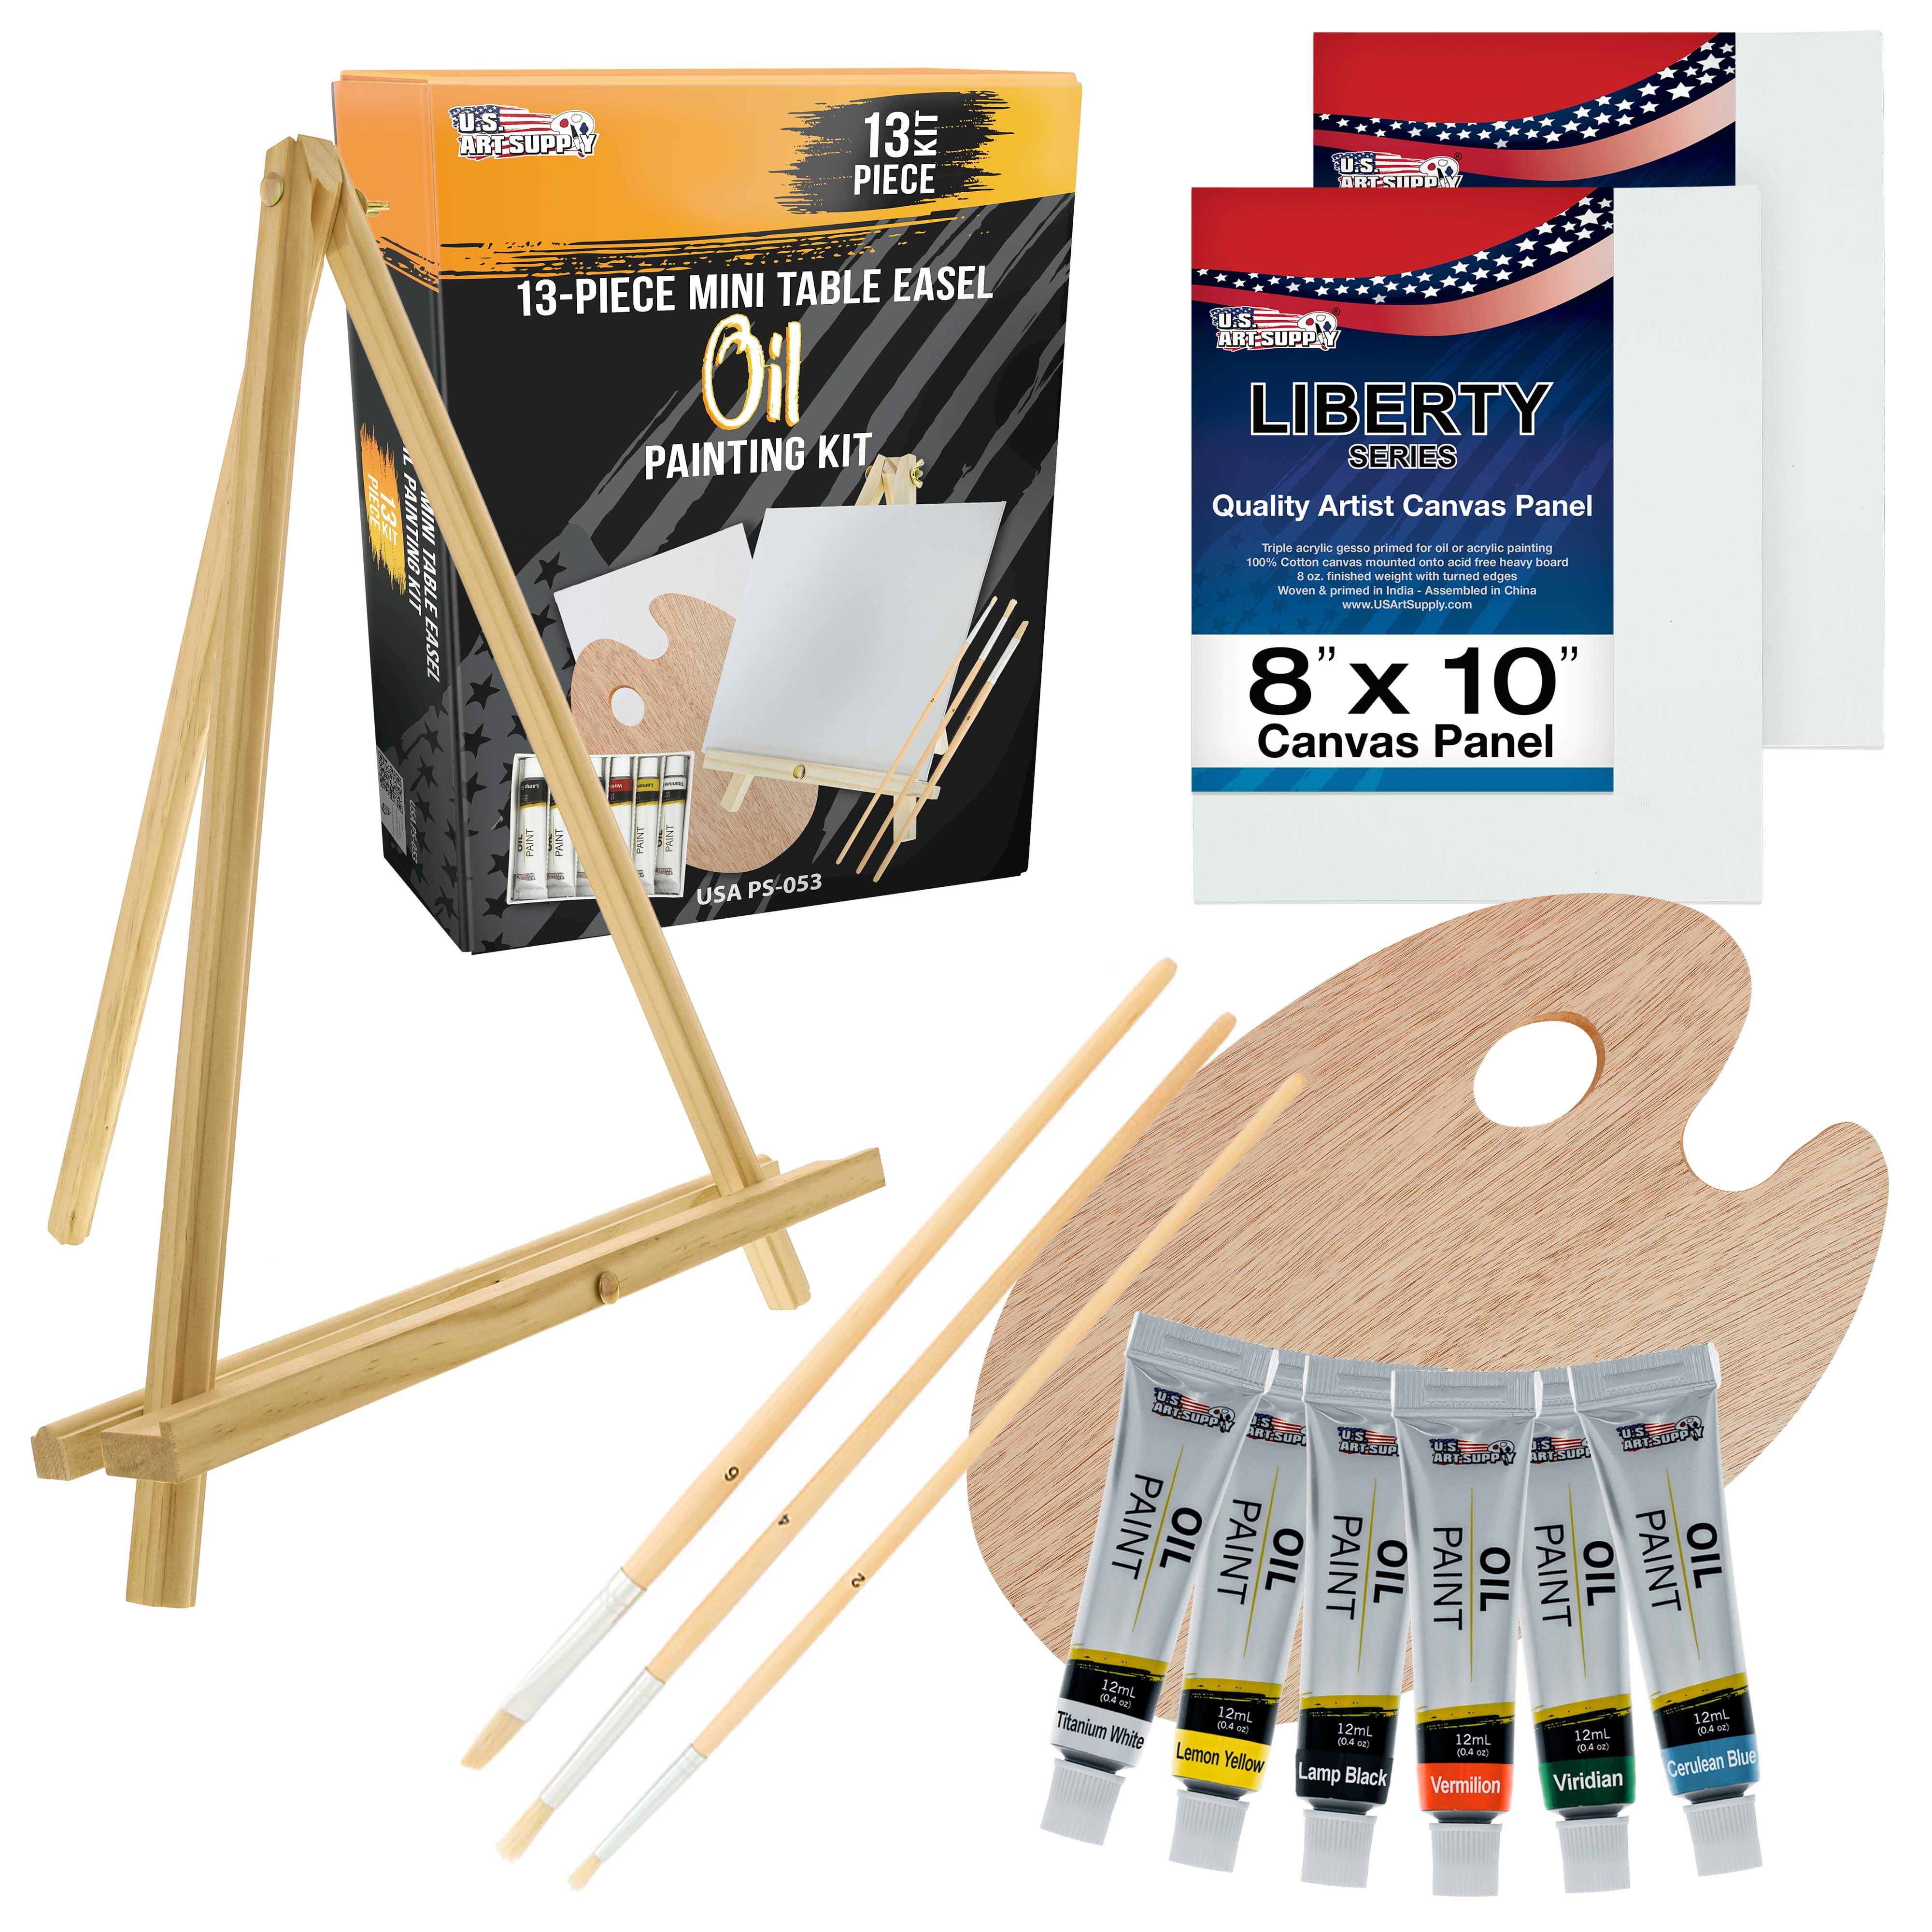 Artist/Painter Set for Adults and Children Wooden Easel with Canvas Art Ideal for Painting 